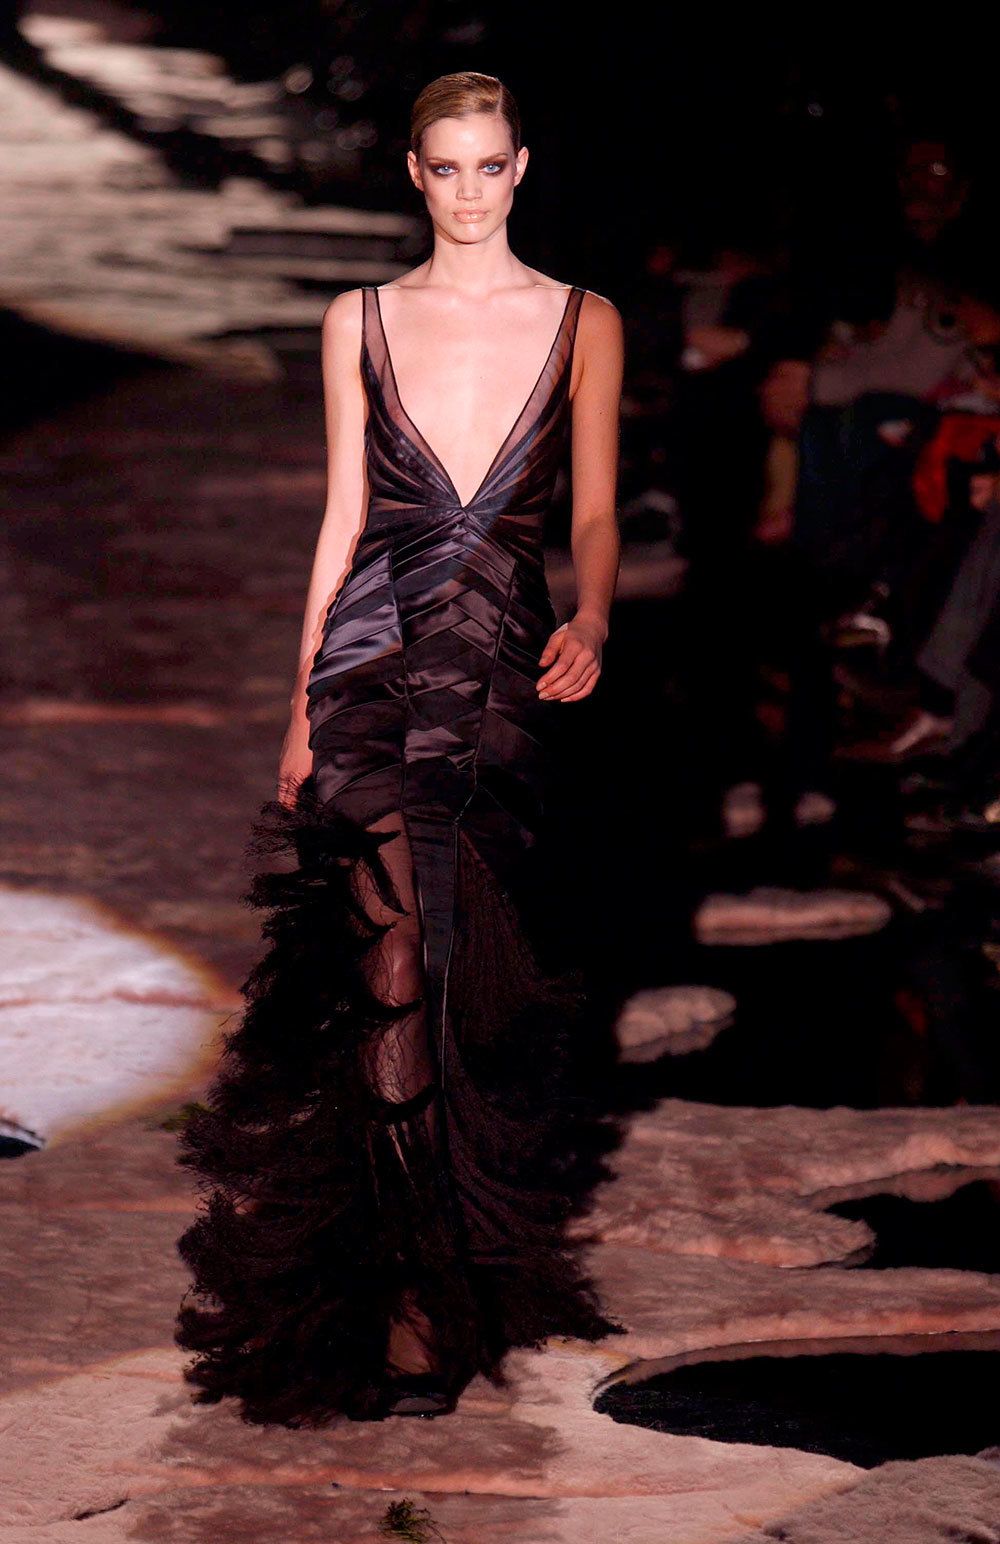 Throwback Thursday: Tom Ford for Gucci